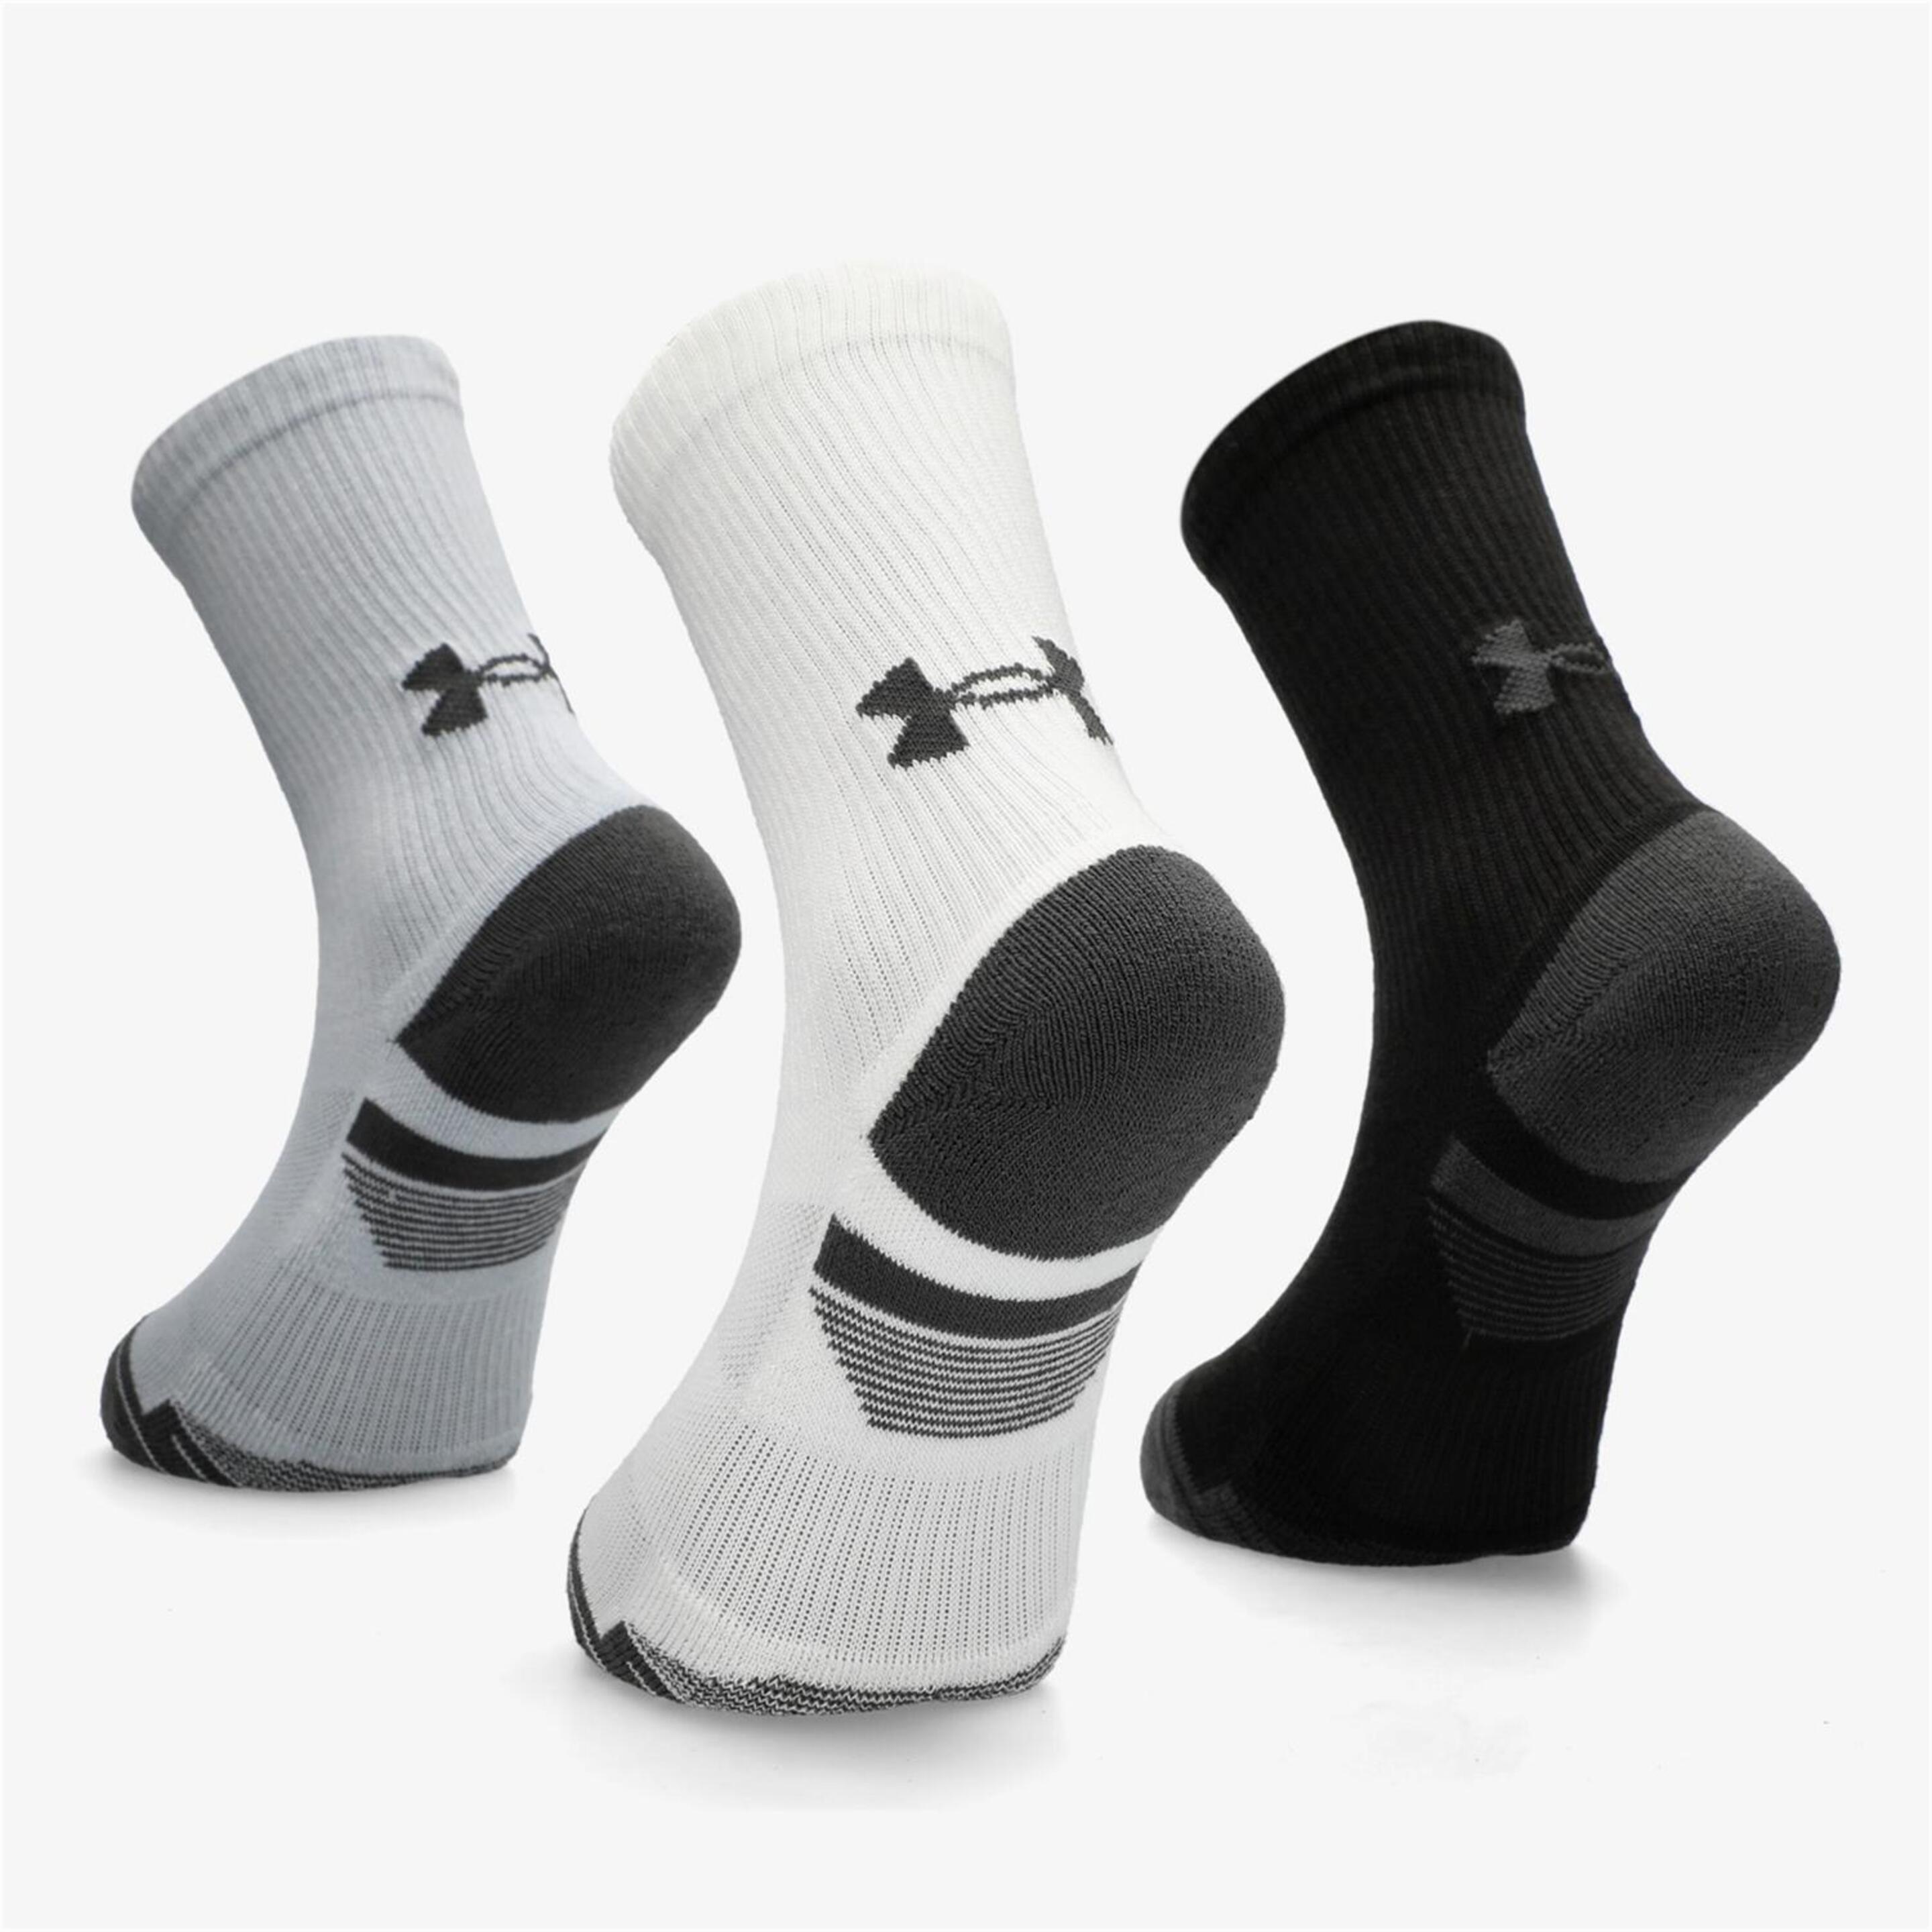 Under Armour Performance Tech - Negro - Calcetines